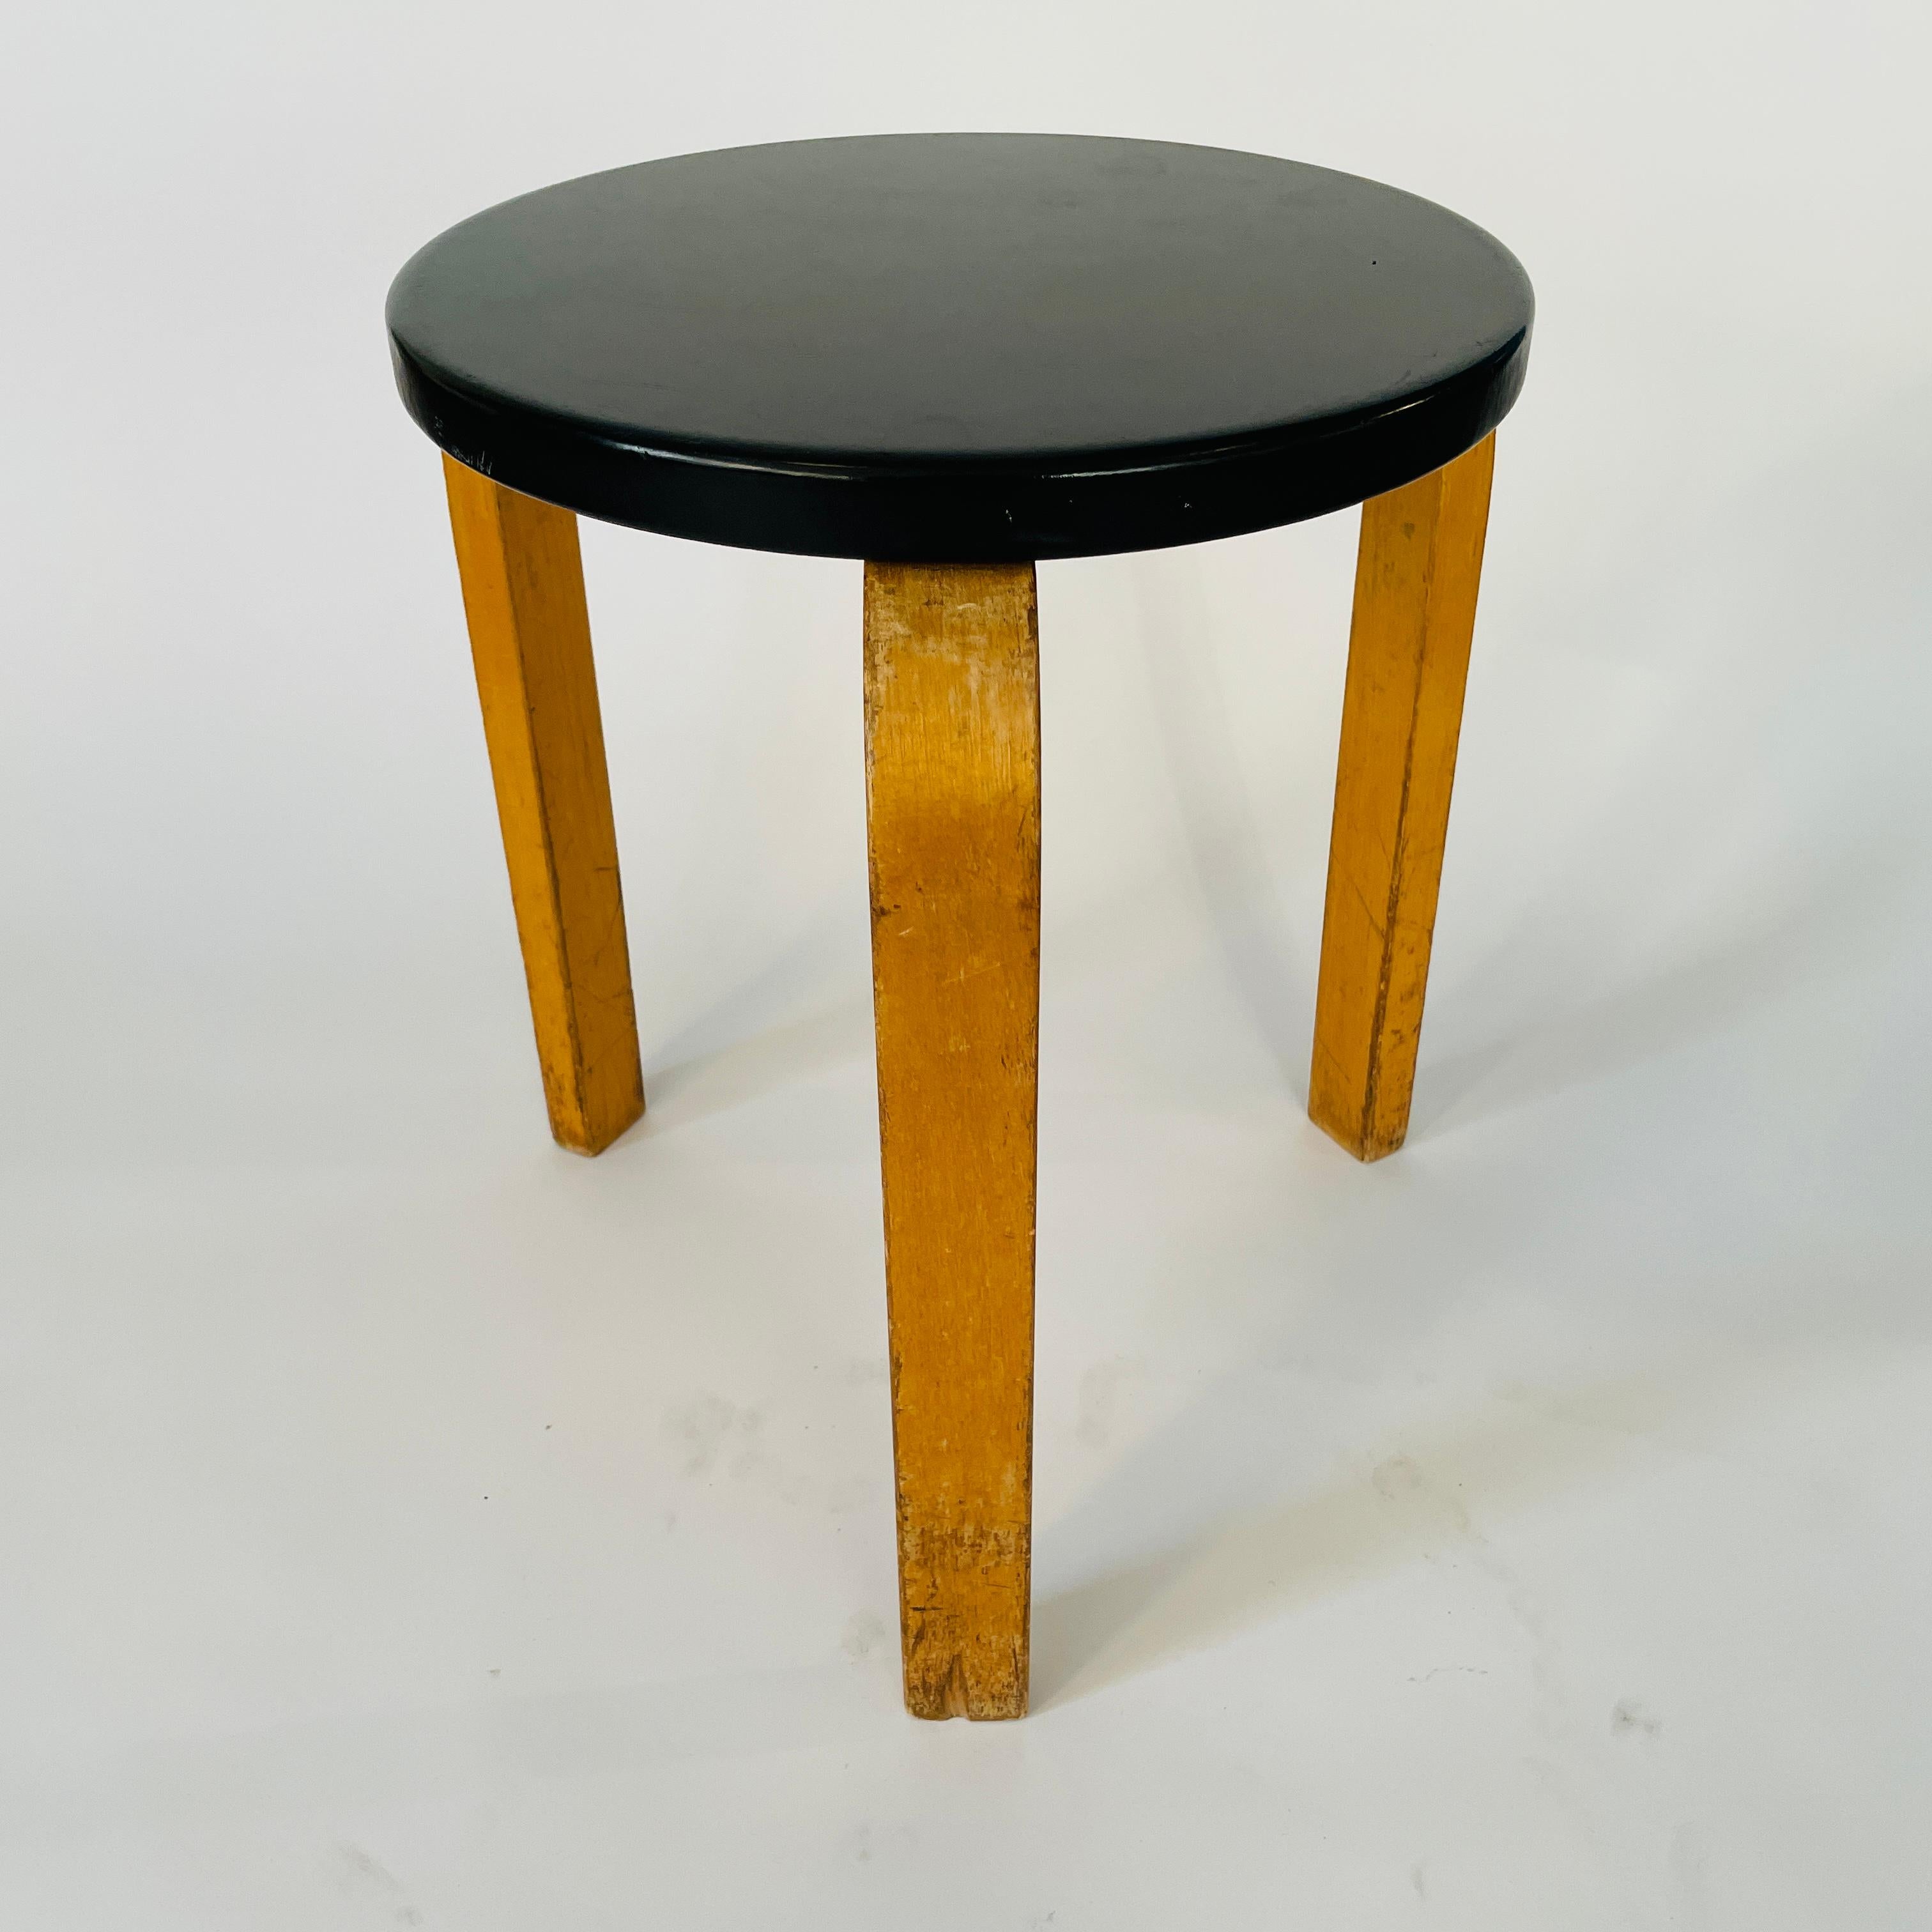 Iconic Aalto three-legged stool. Stool 60 was officially unveiled to an enthusiastic public in London at a Finnish furniture review in November 1933.

The three-legged Aalto stool is still today a beautiful, genius product whose simple shape will